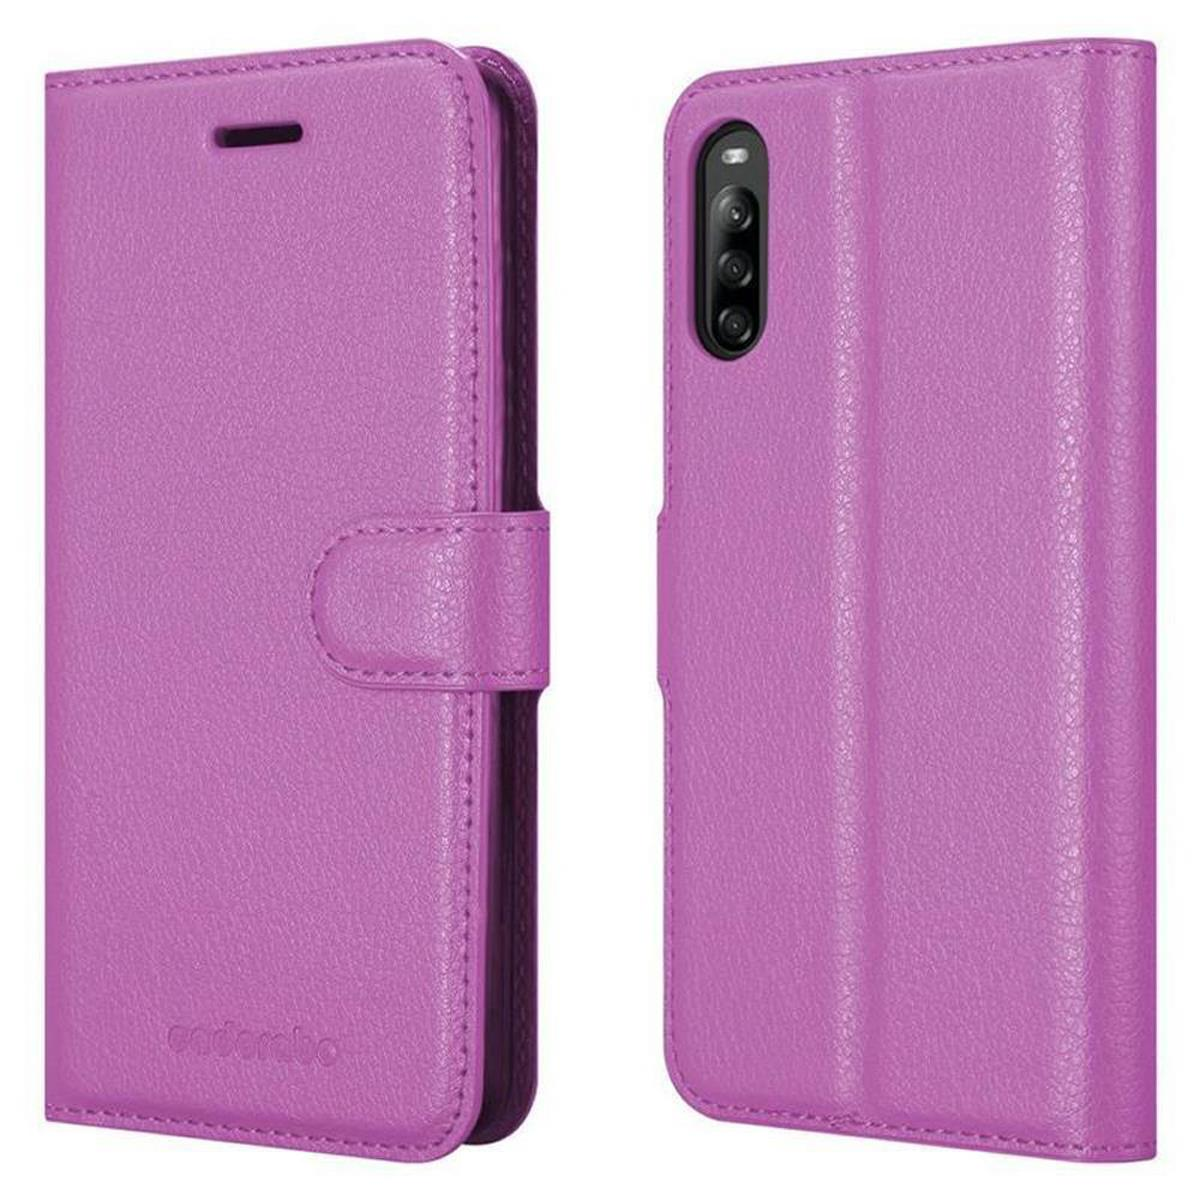 Bookcover, L4, Xperia Standfunktion, Hülle Book MANGAN VIOLETT Sony, CADORABO